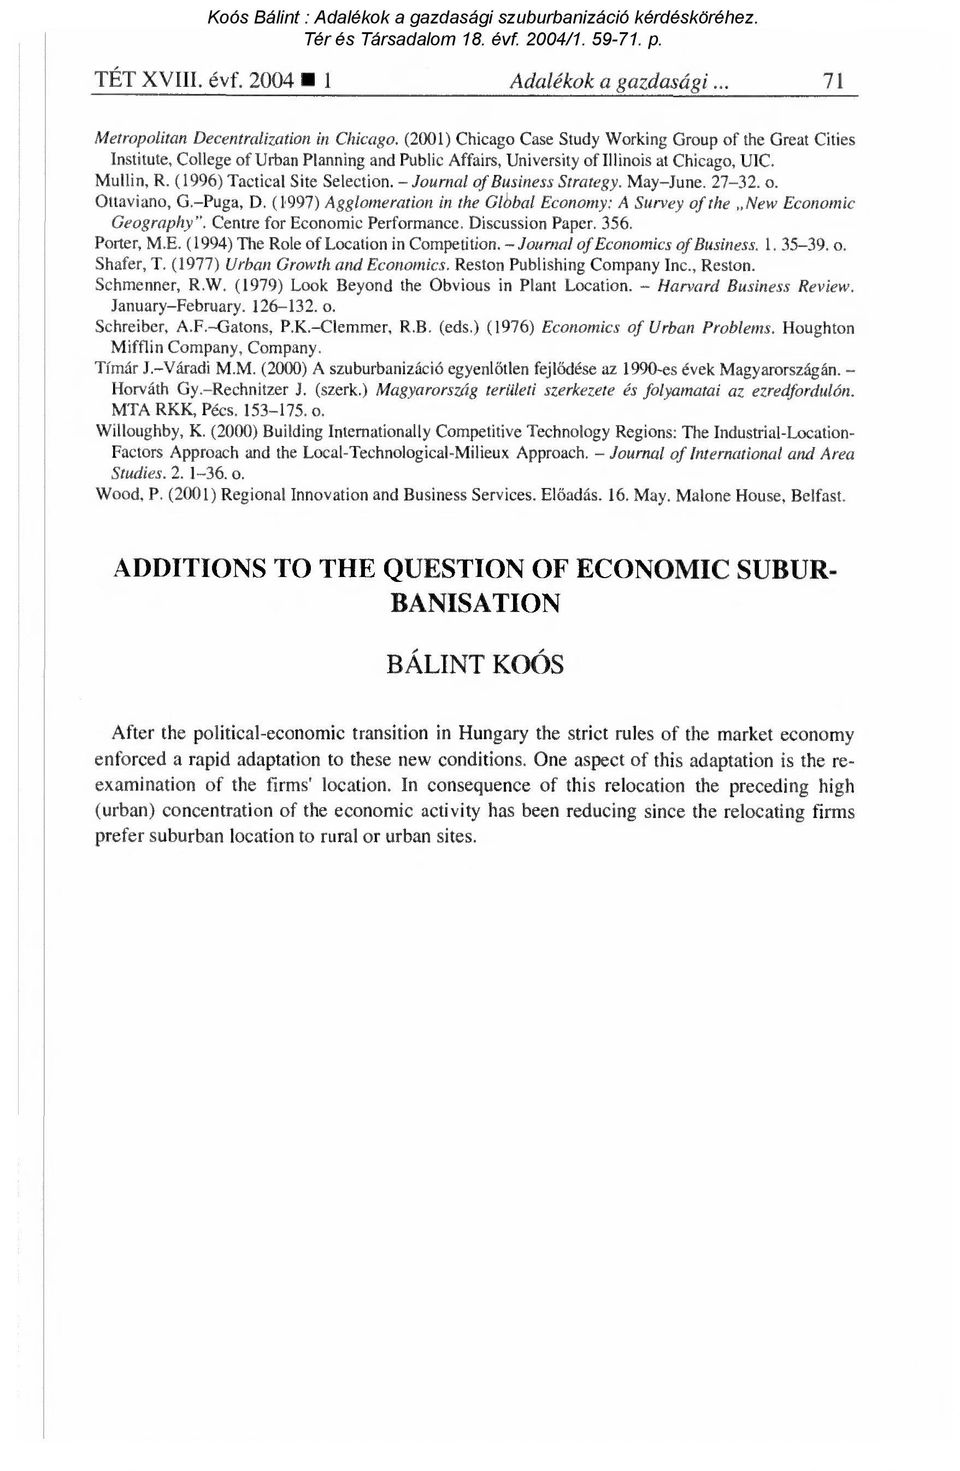 Journal of Business Strategy. May June. 27-32. o. Ottaviano, G. Puga, D. (1997) Agglomeration in the Glbbal Economy: A Survey of the New Economic Geography". Centre for Economic Performance.